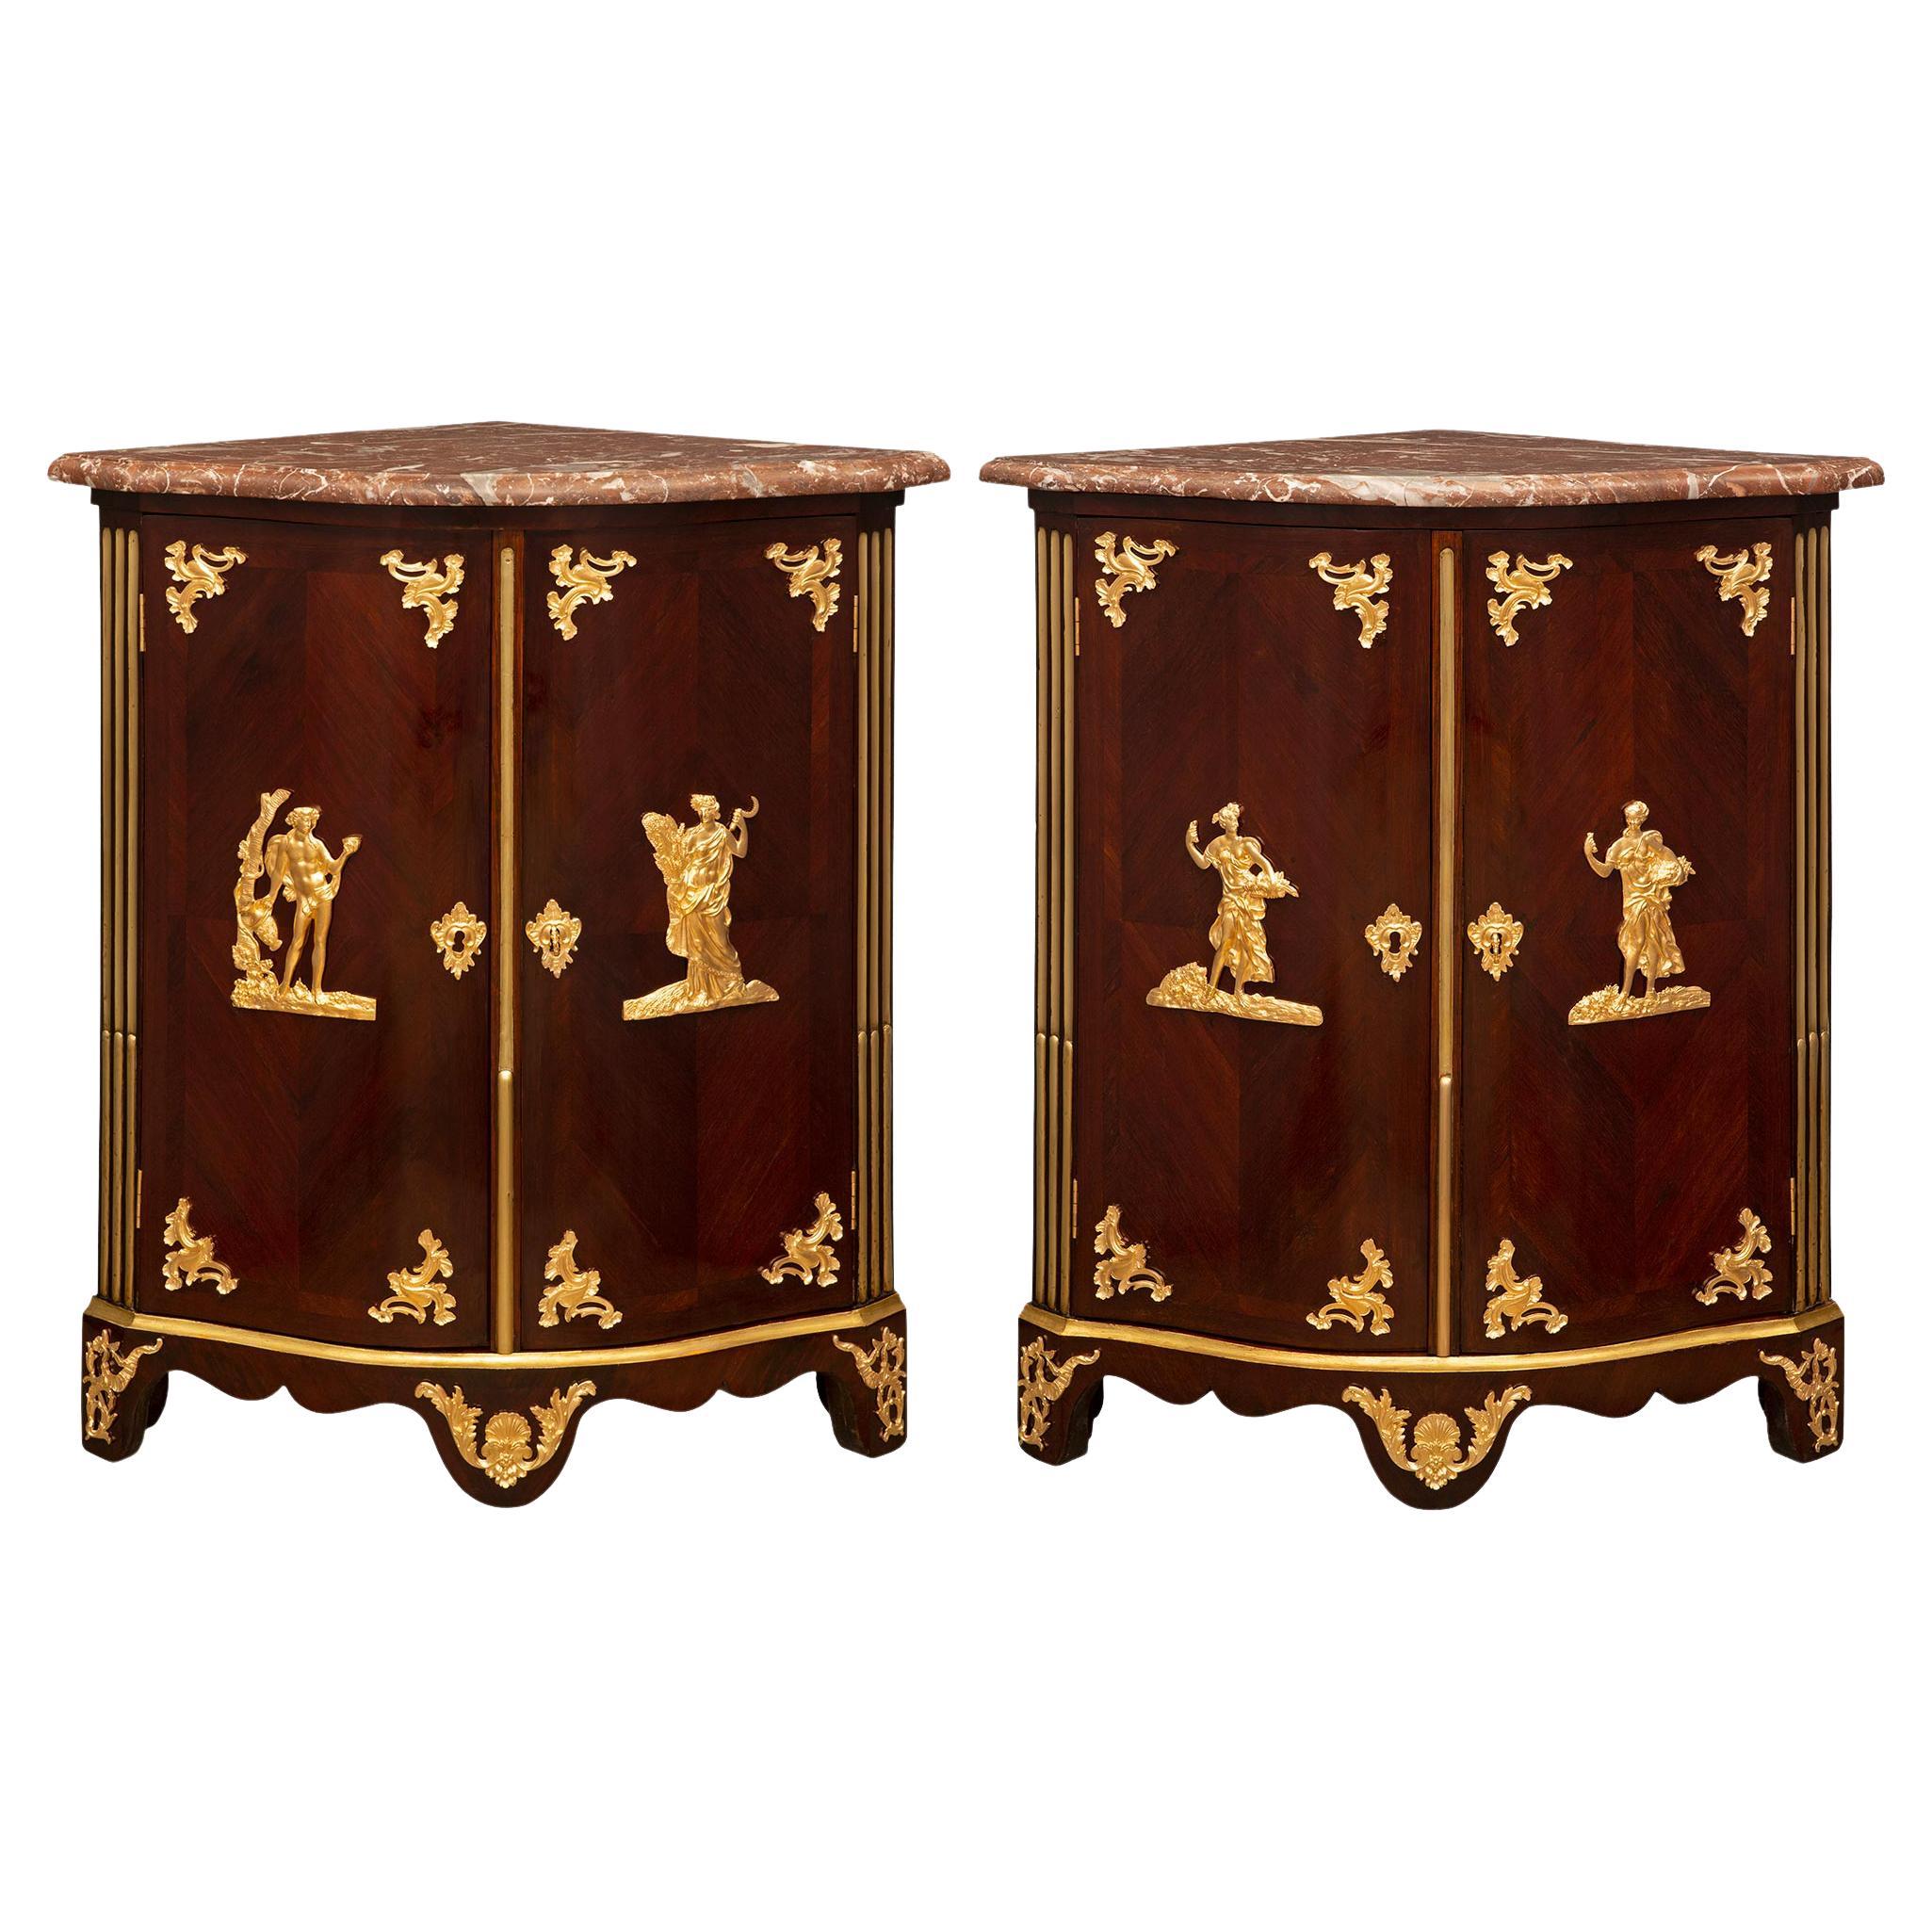 Pair of French 18th Century Régence Period Corner Cabinets Stamped Saunier For Sale